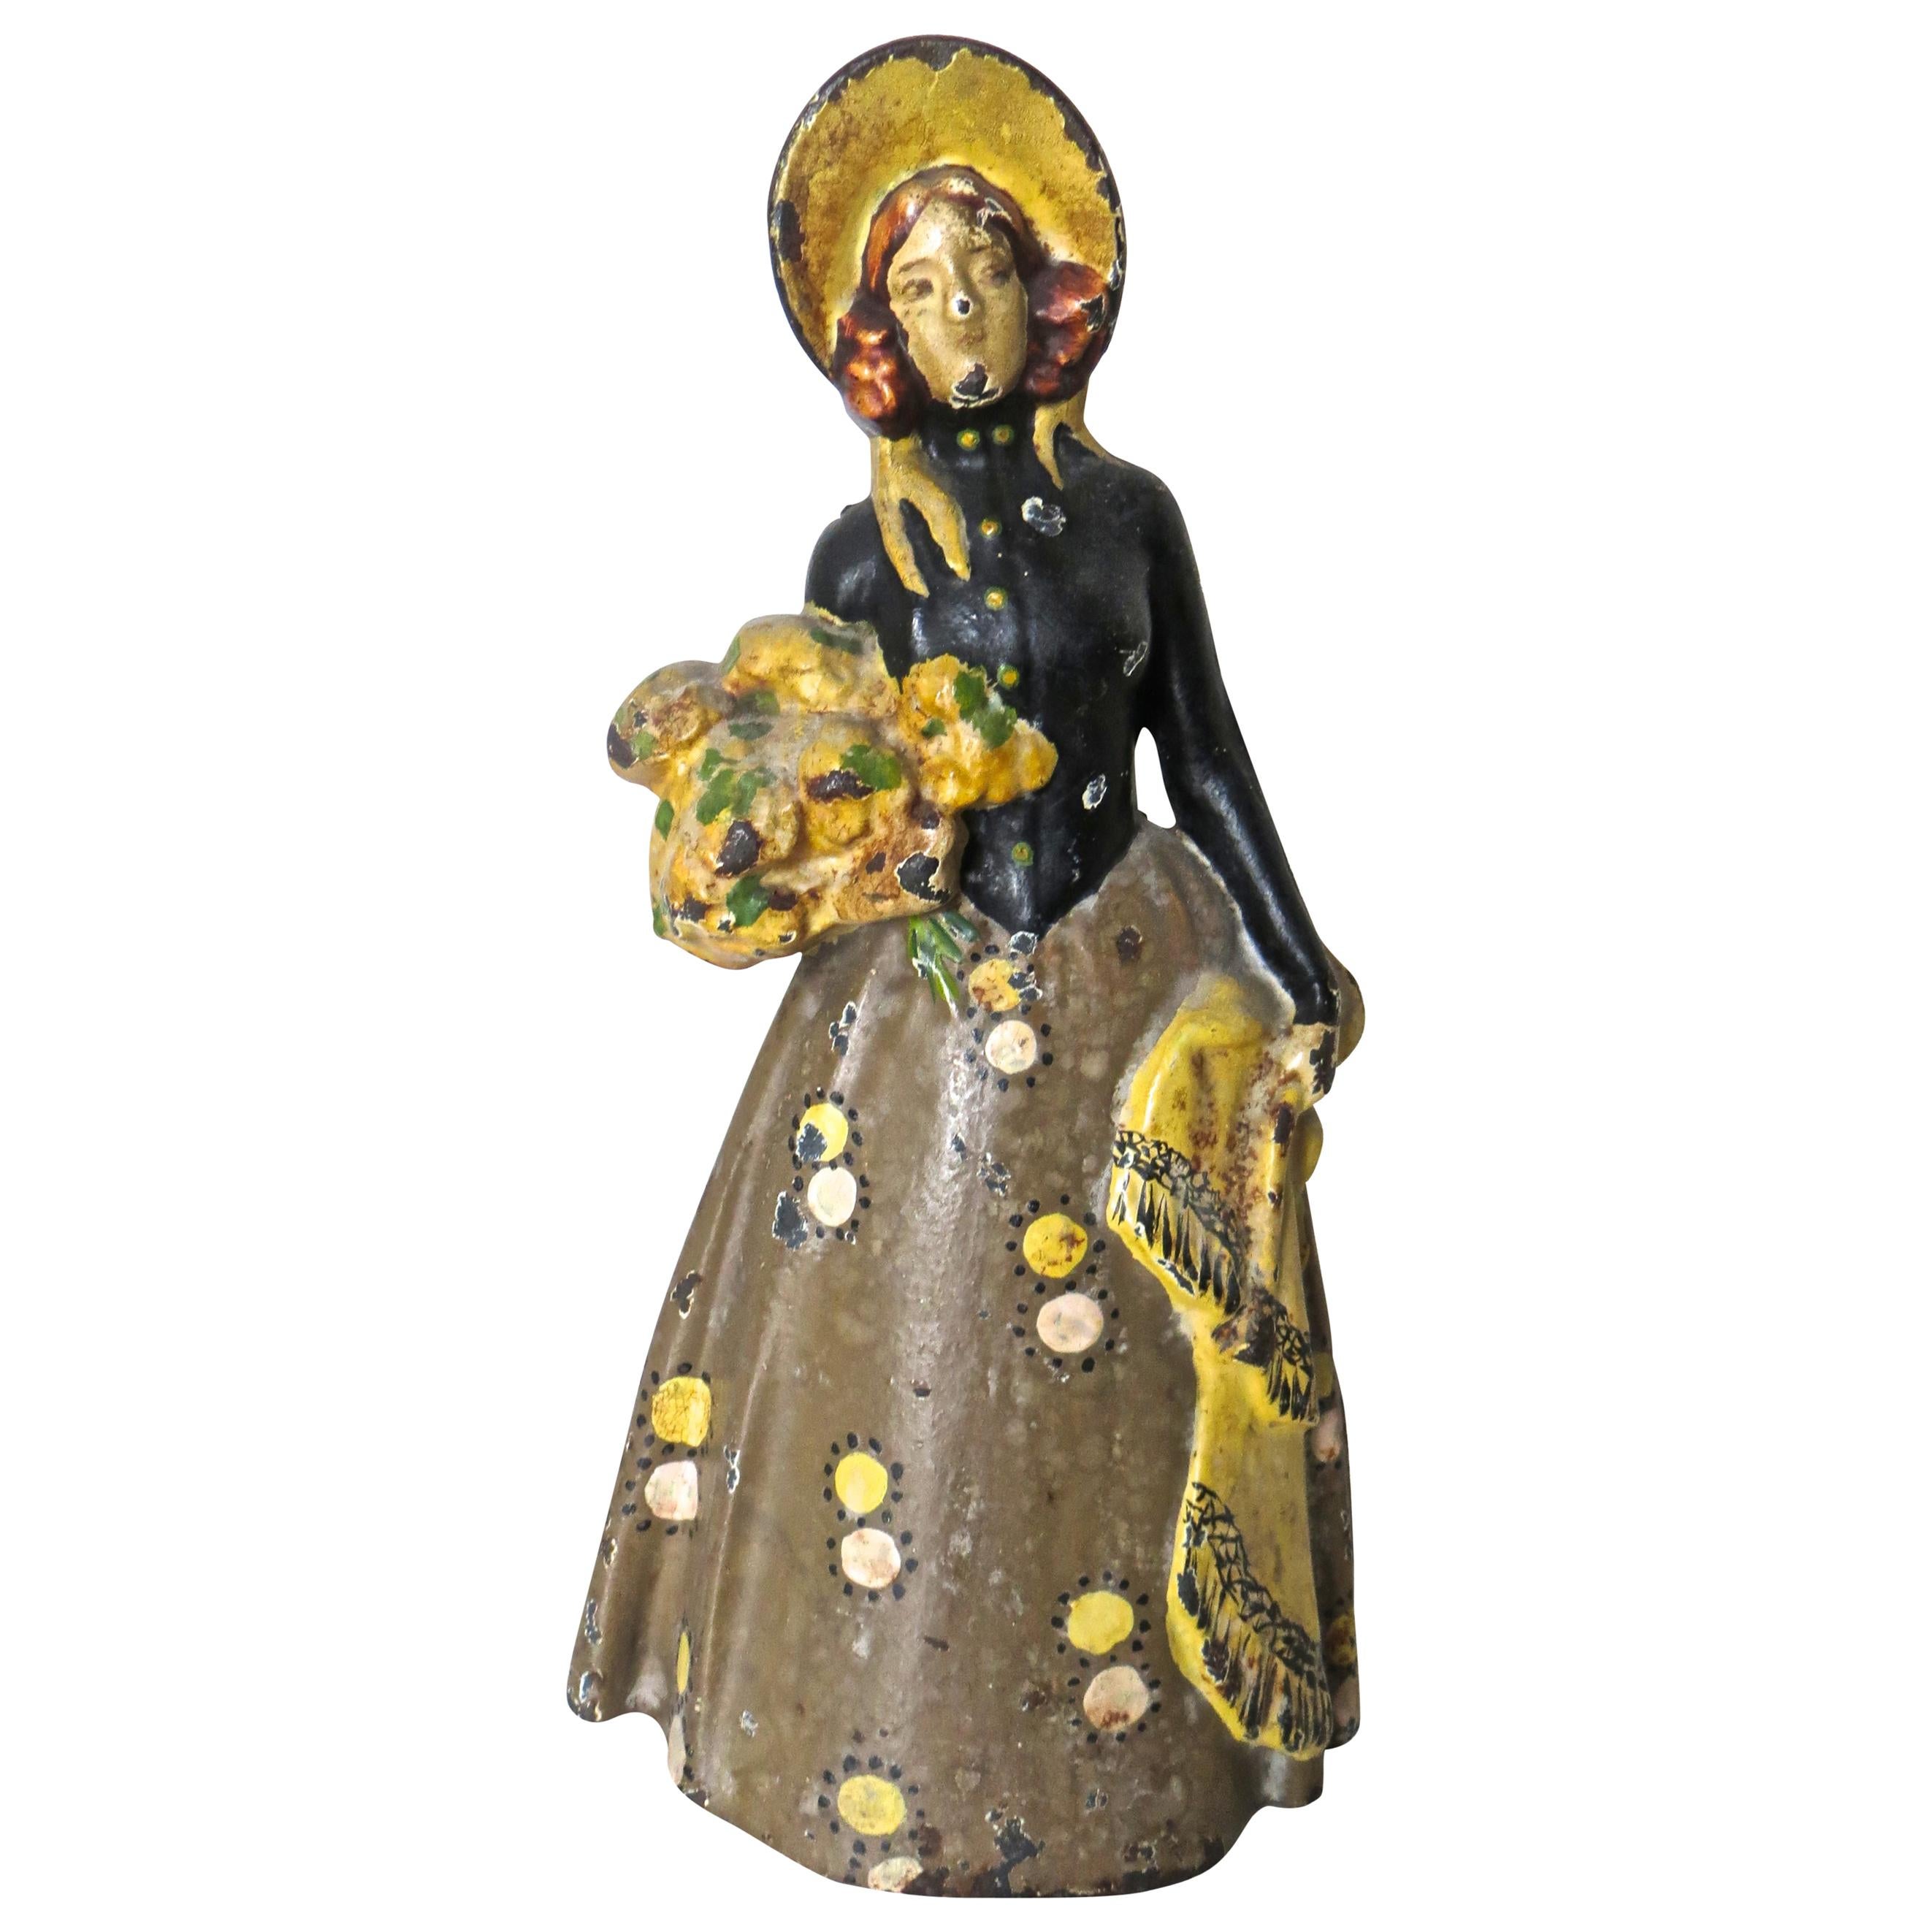 Vintage Cast Iron Doorstop "Lady With Flowers", American, circa 1915